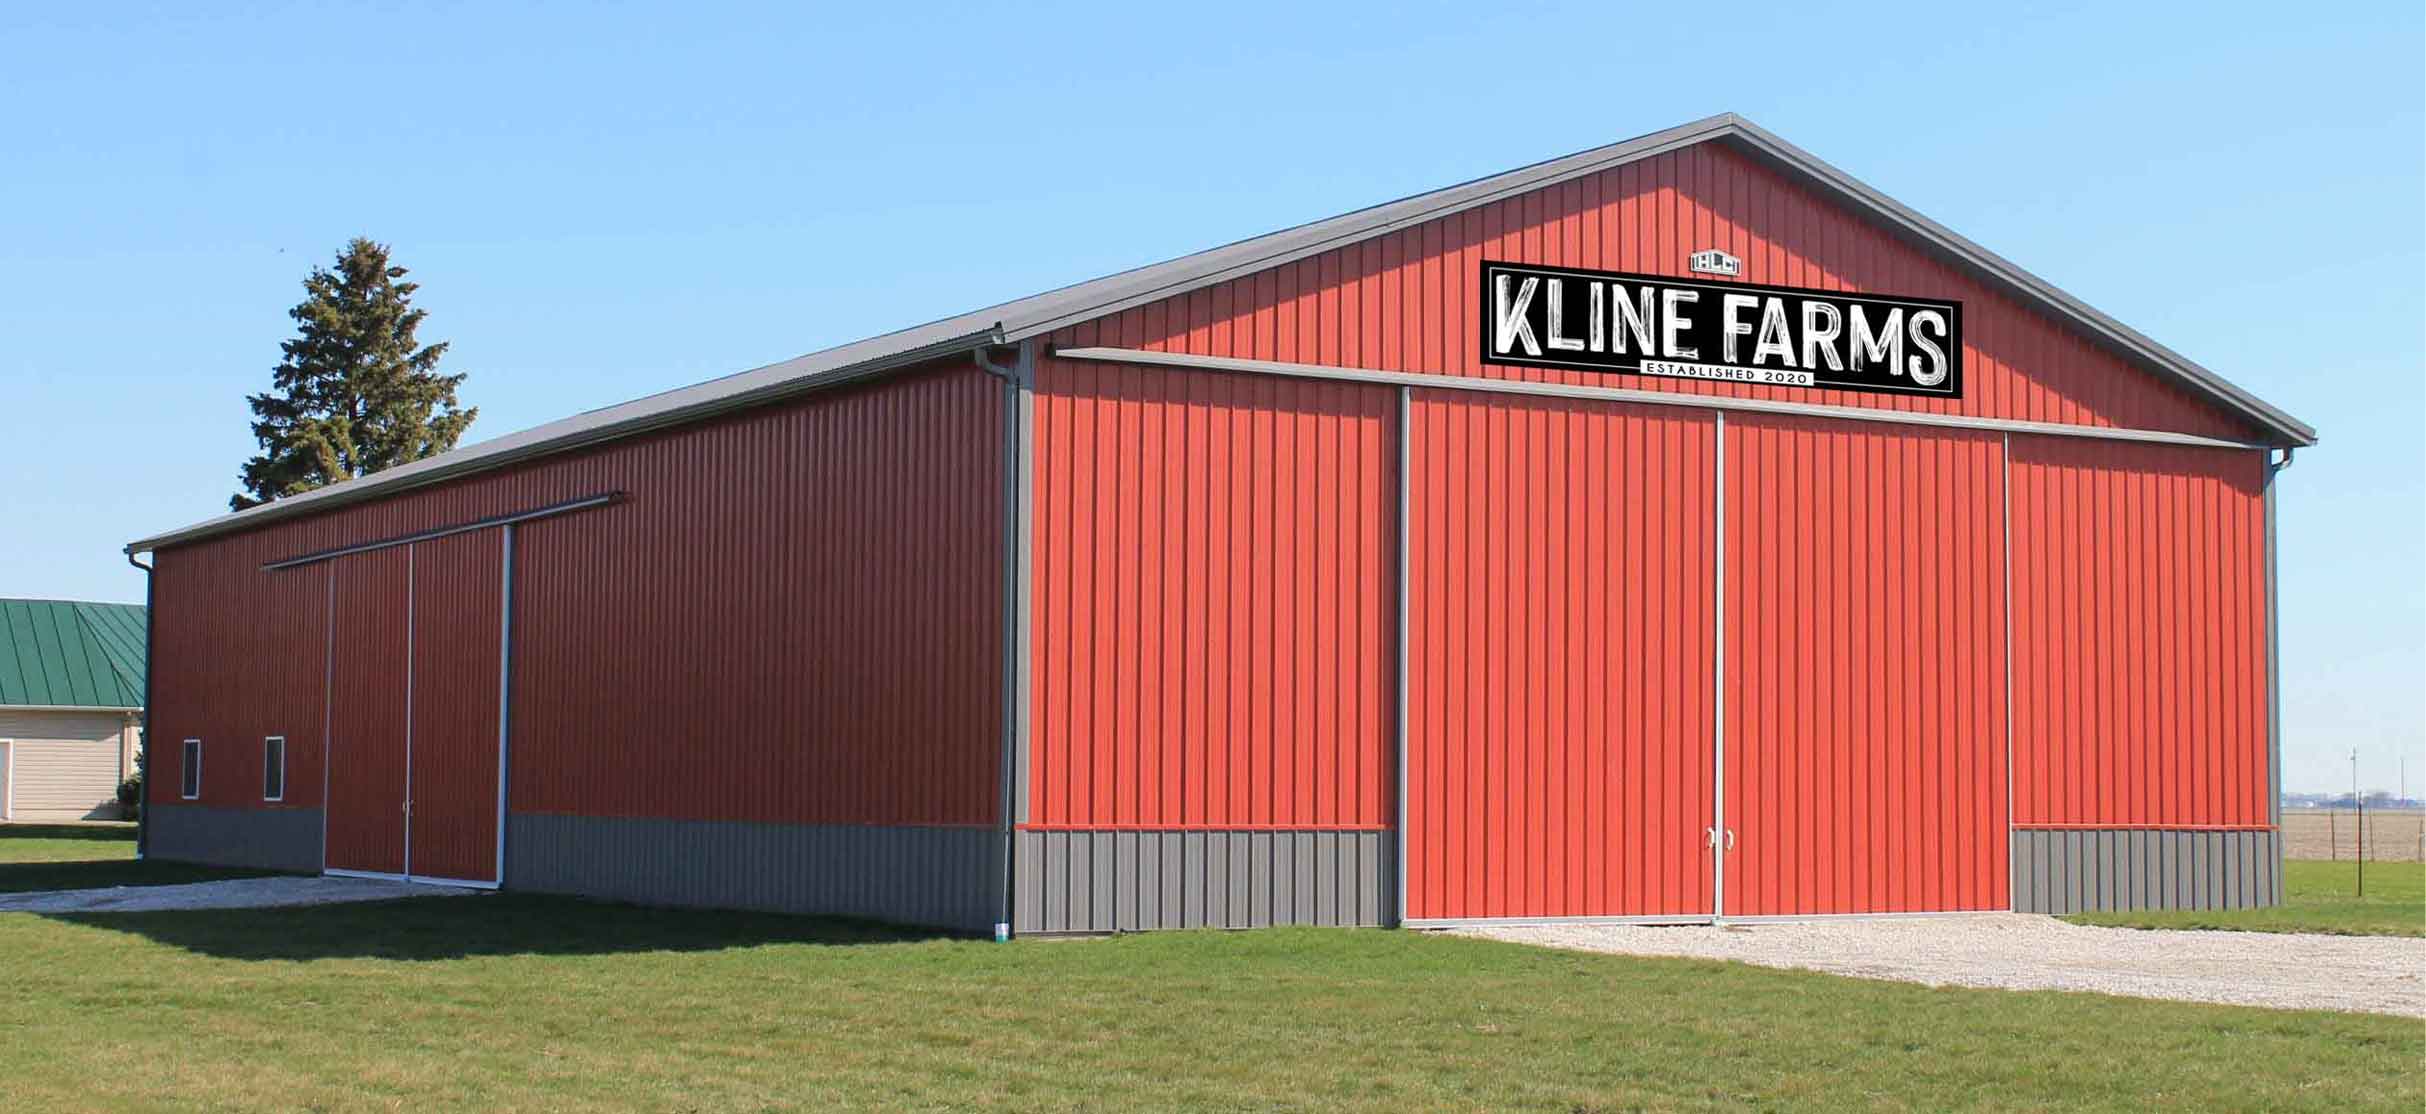 Personalized Barn Signs, Large Barn Signs with a modern font on black metal